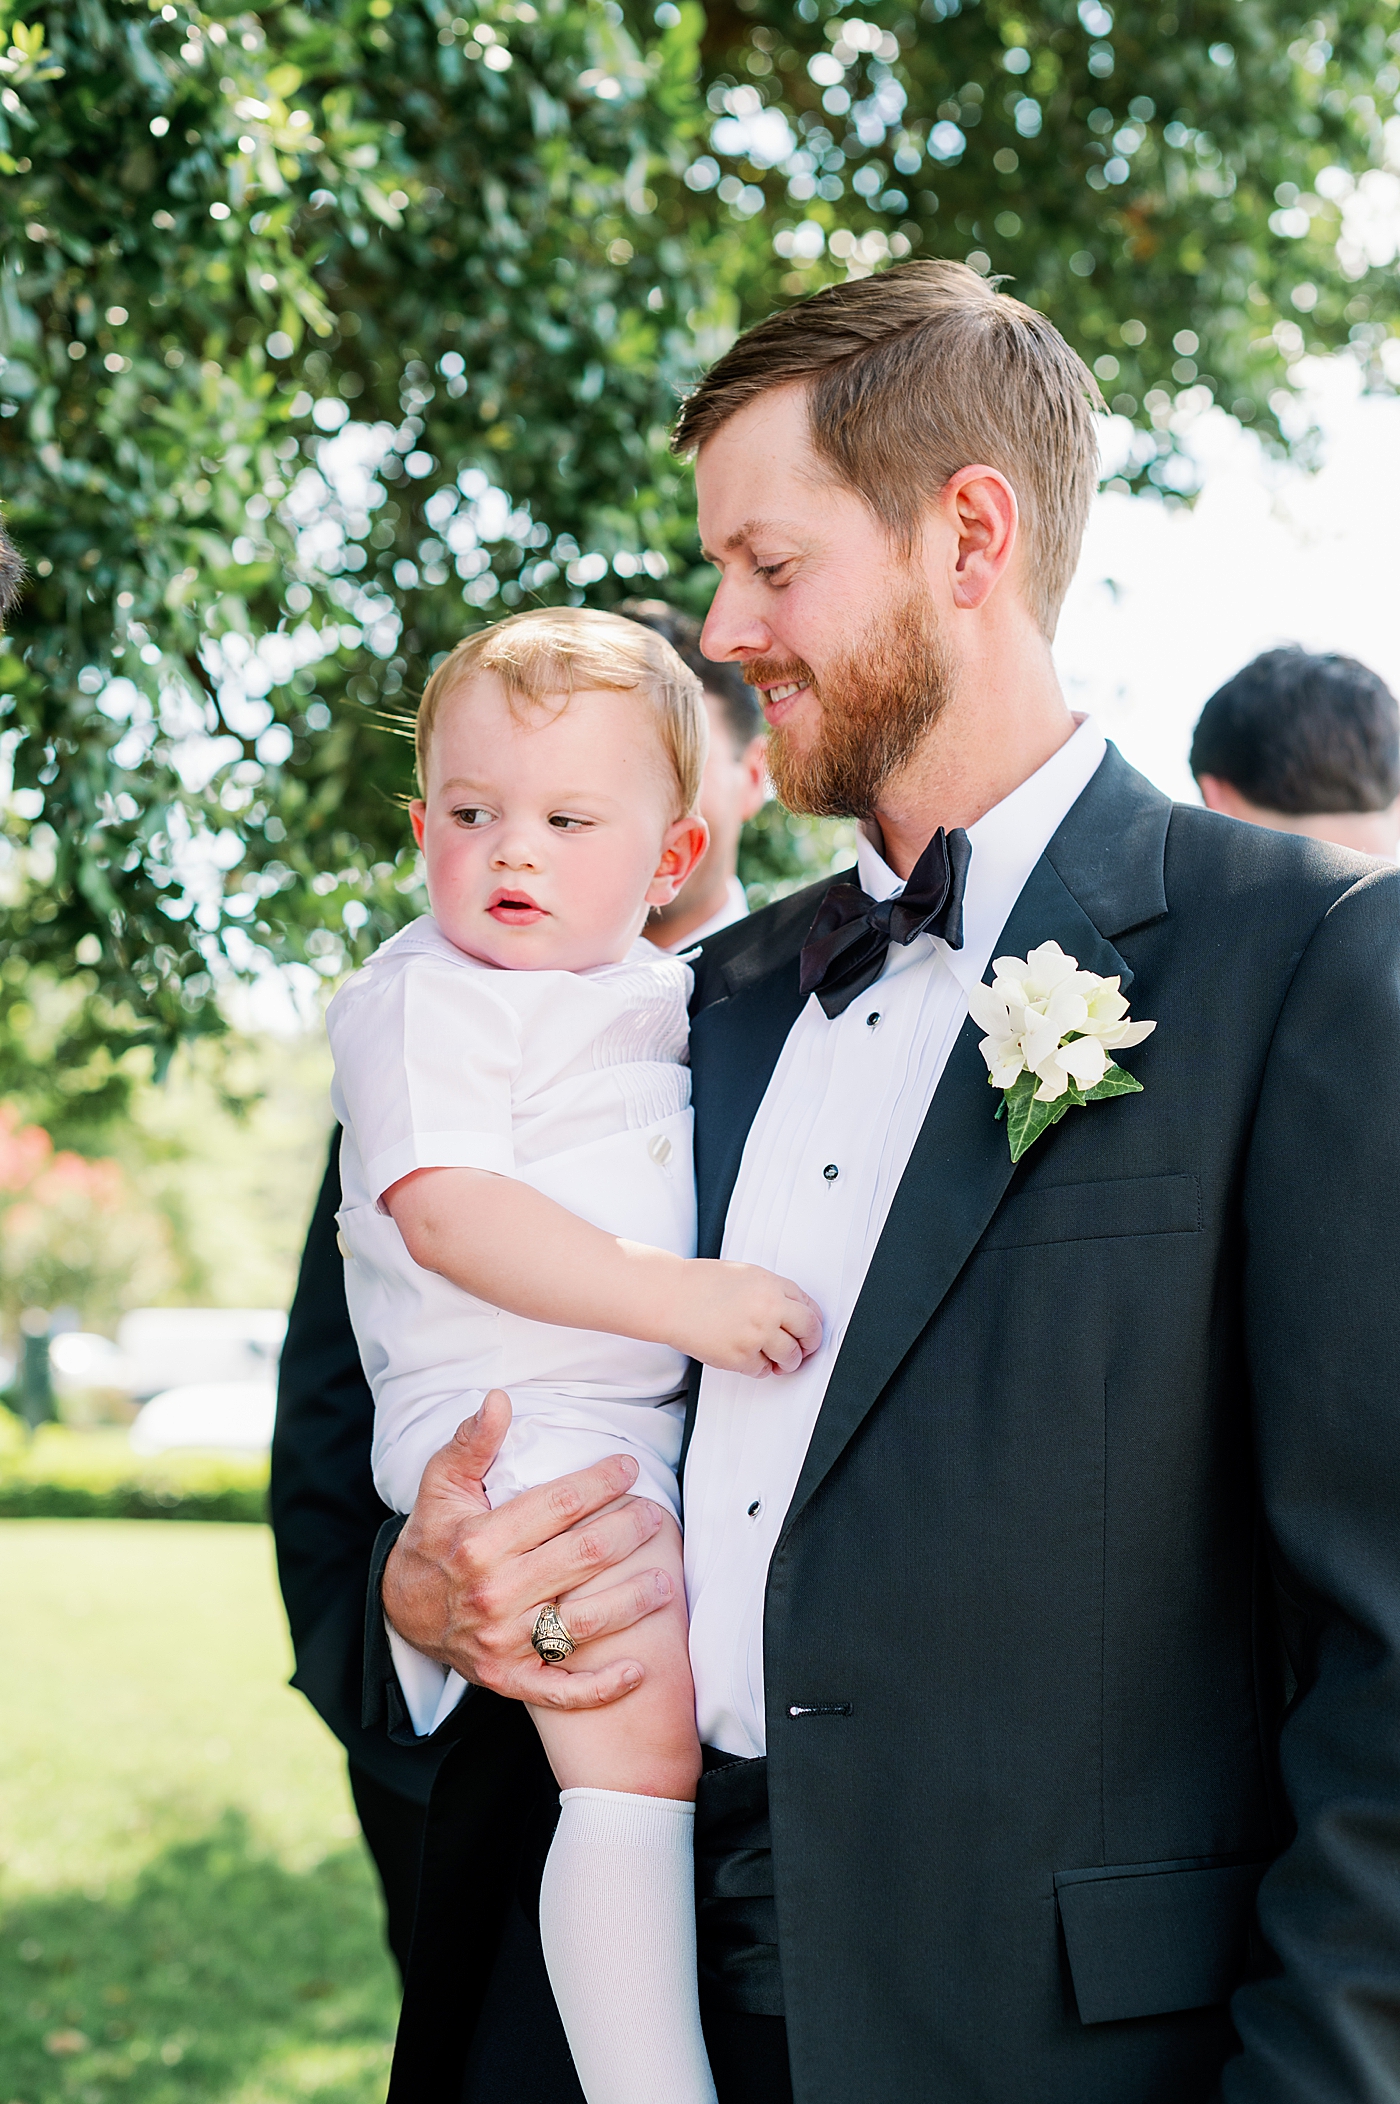 Groomsmen holding baby in white outfit | Image by Annie Laura Photo